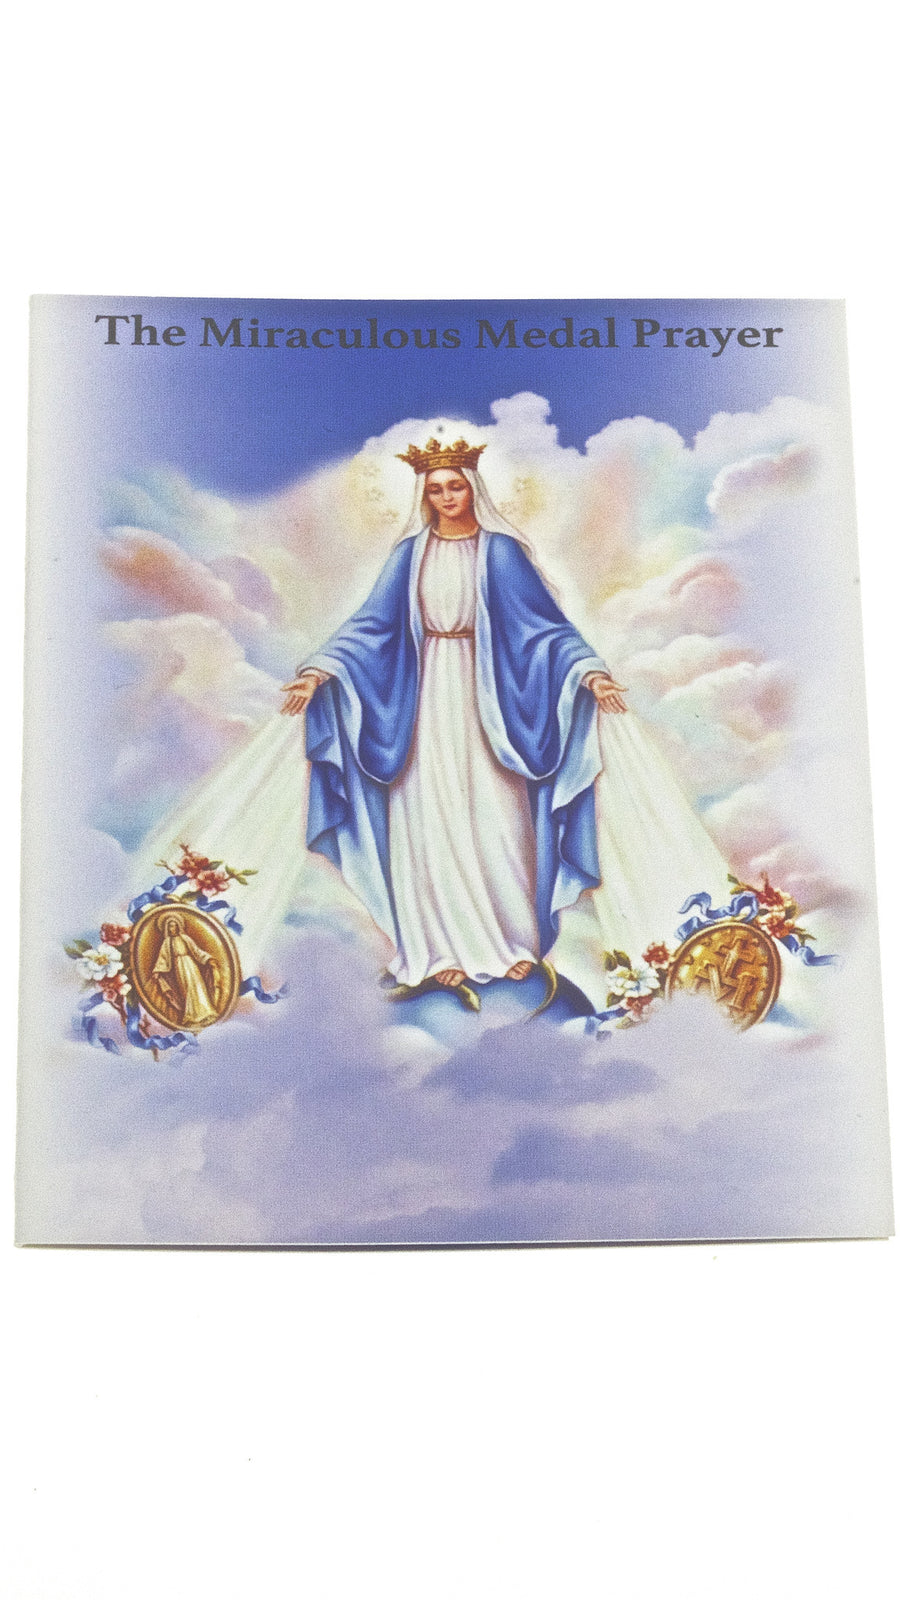 100 Miraculous Medal Prayer Booklets